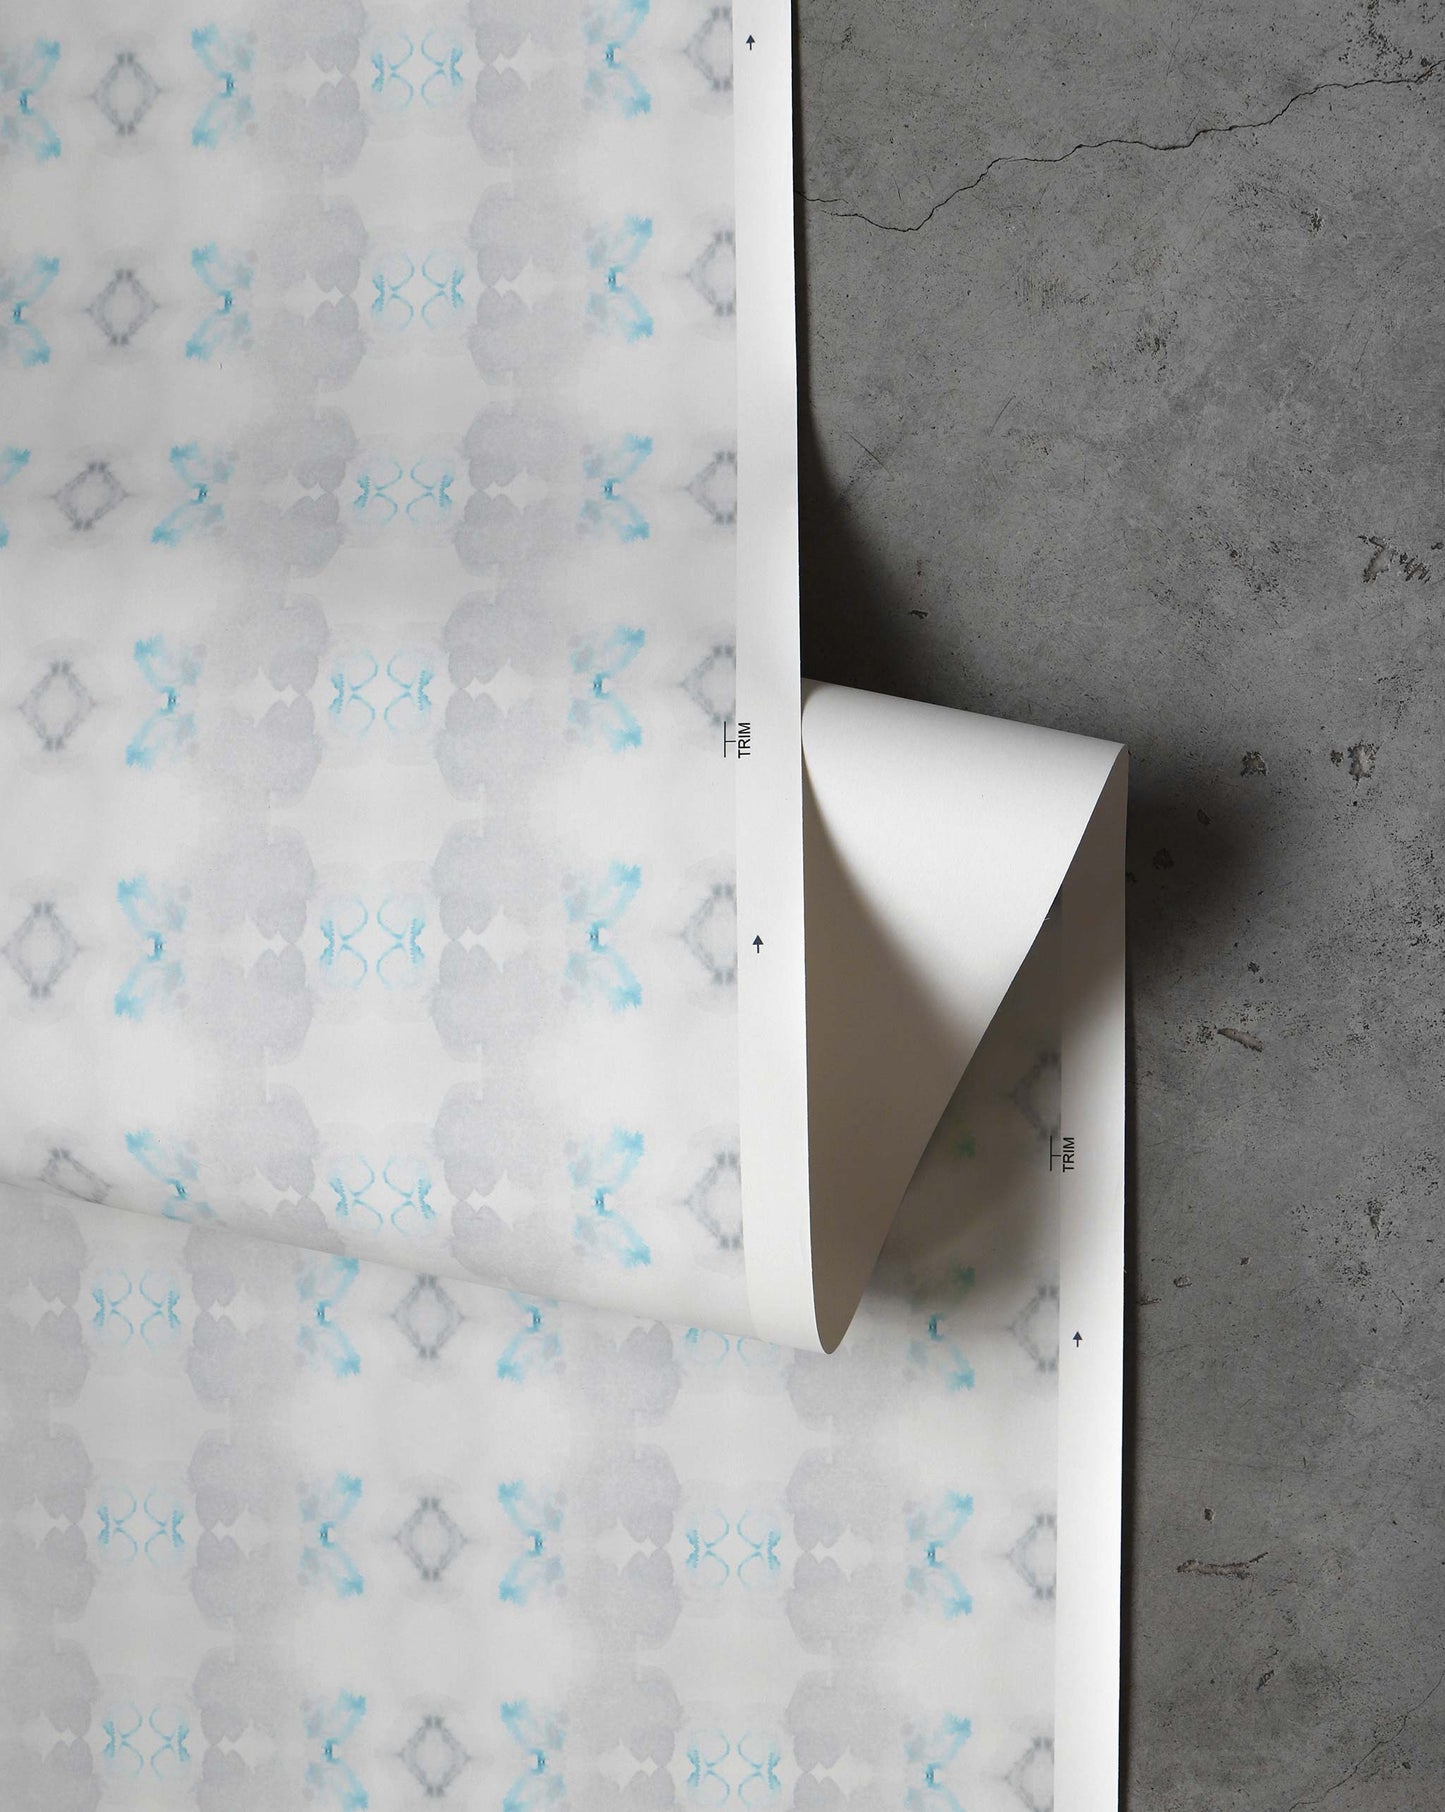 An unrolled roll of Icelandic Mist Wallpaper in Sea Green lies on a concrete floor, featuring a subtle geometric pattern with blue and gray accents.